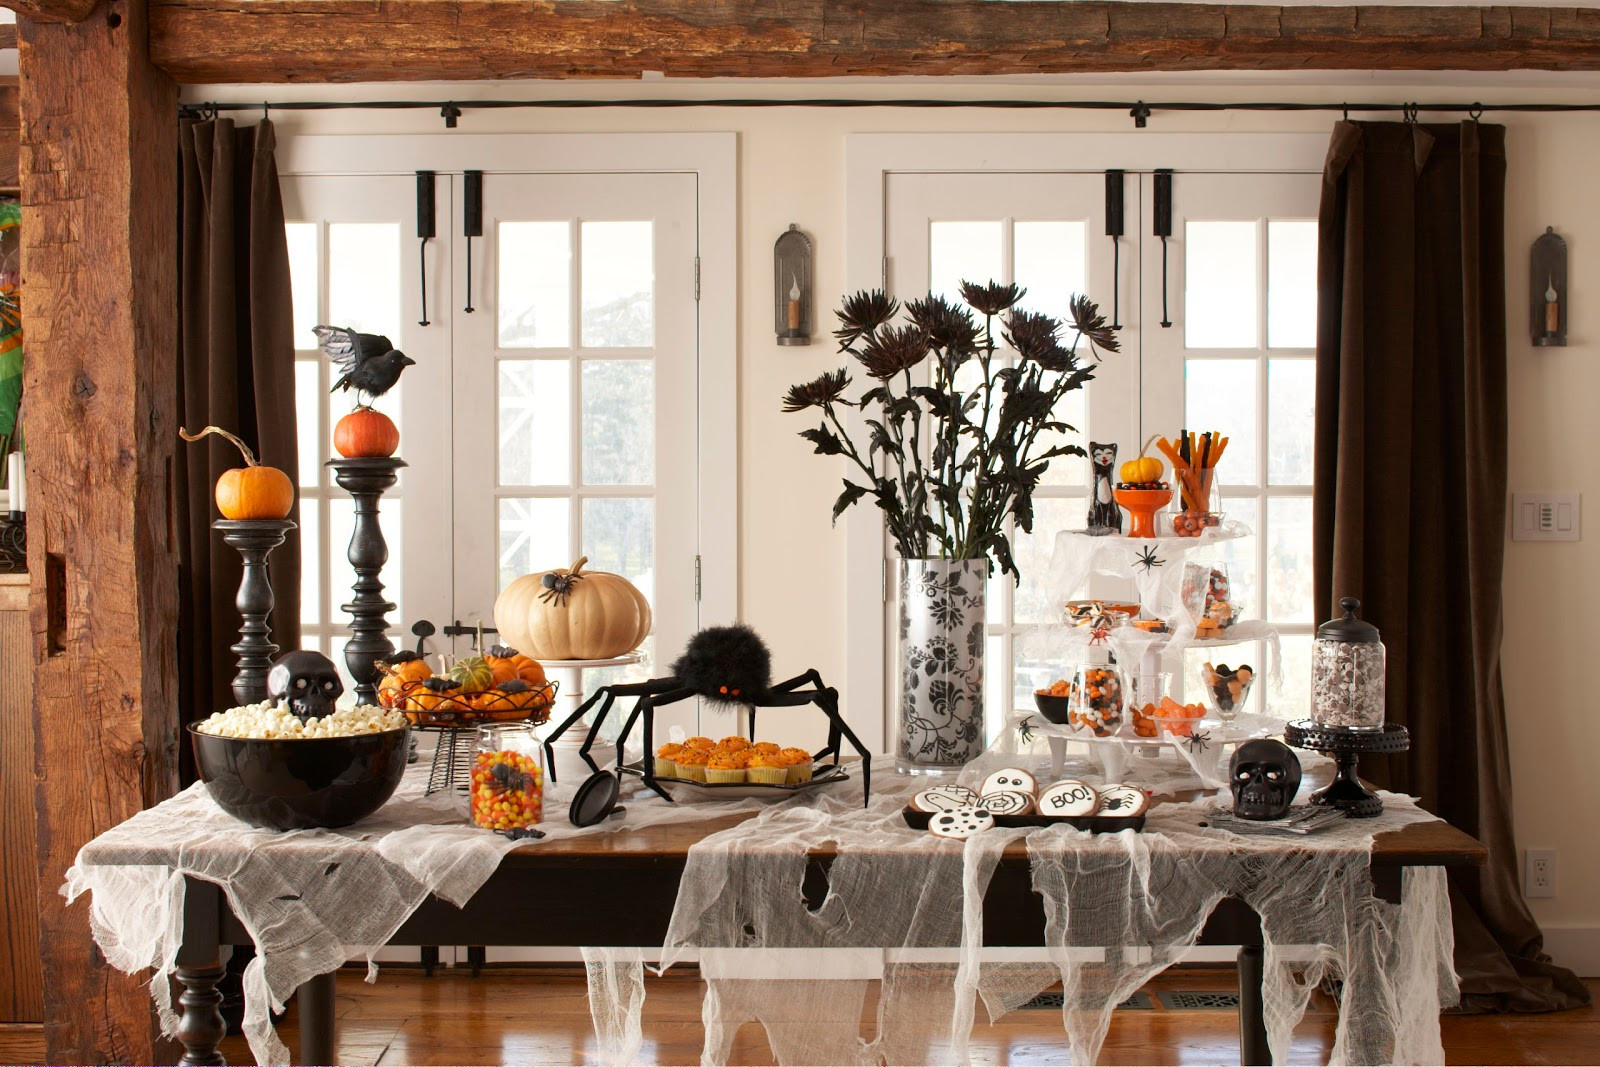 Halloween Decorating Party Ideas
 Karin Lidbeck Clever Halloween party ideas Easy last